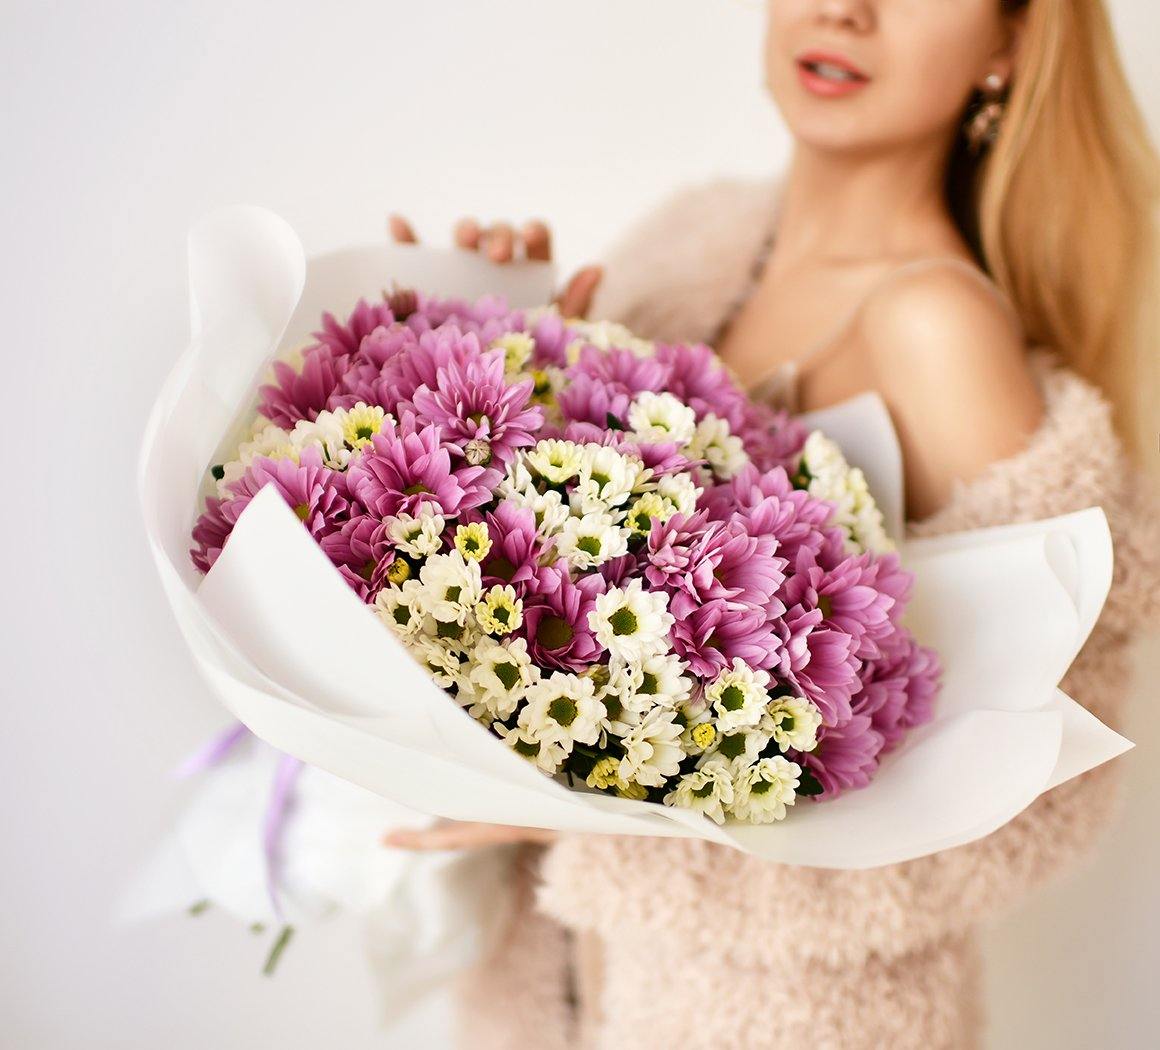 Mrs. Dalloway Club - Your Flowers Subscription Program